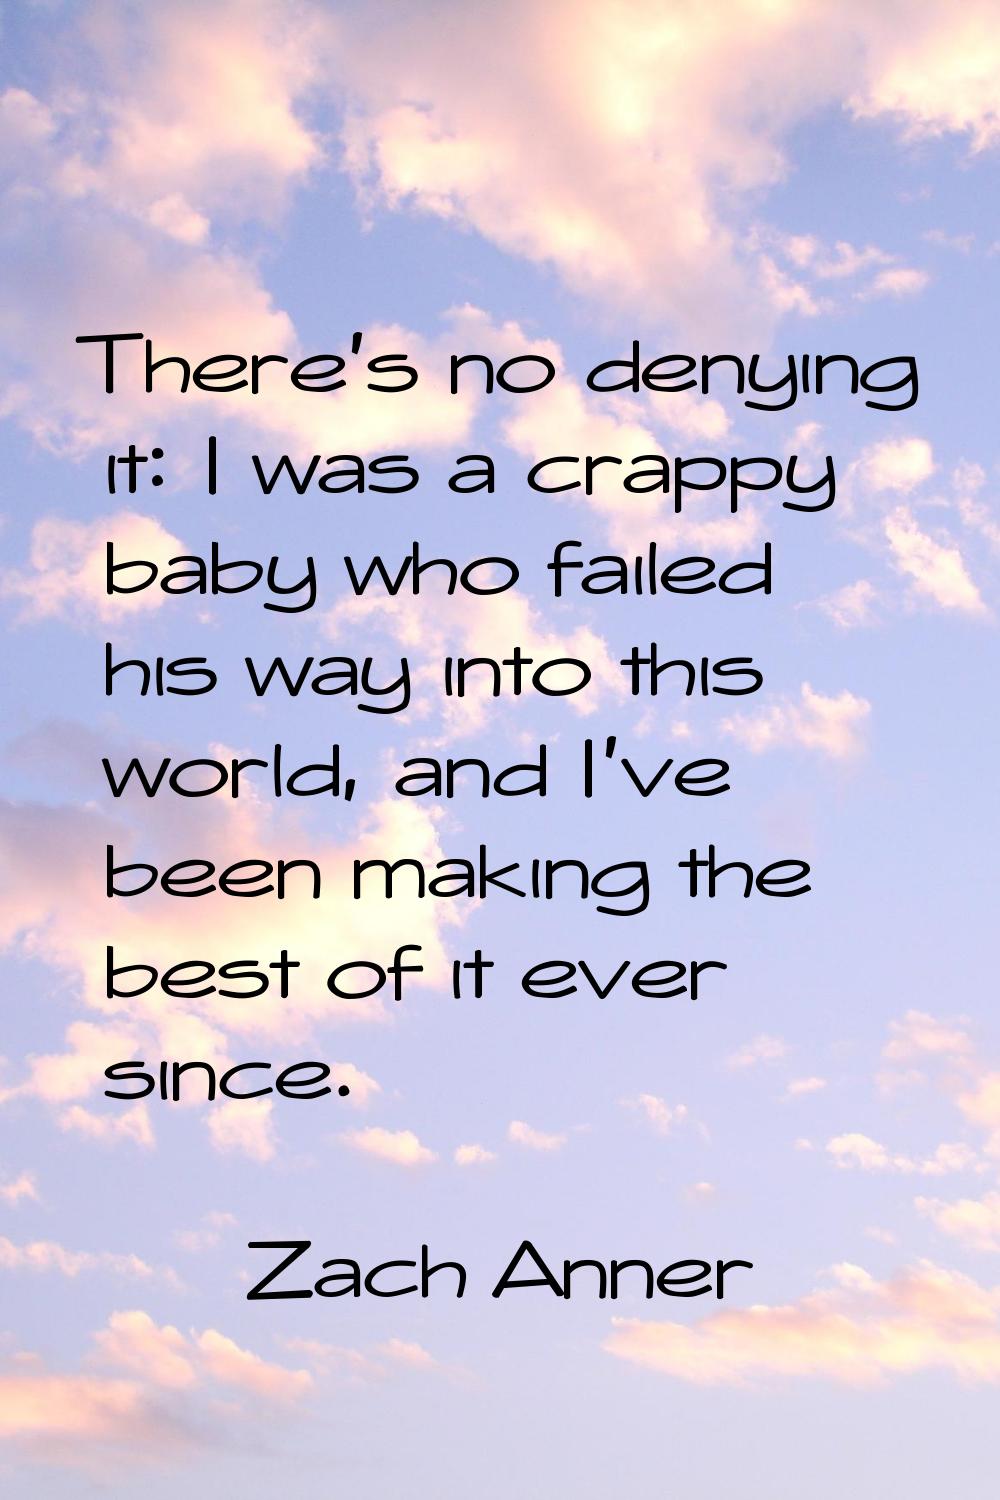 There's no denying it: I was a crappy baby who failed his way into this world, and I've been making